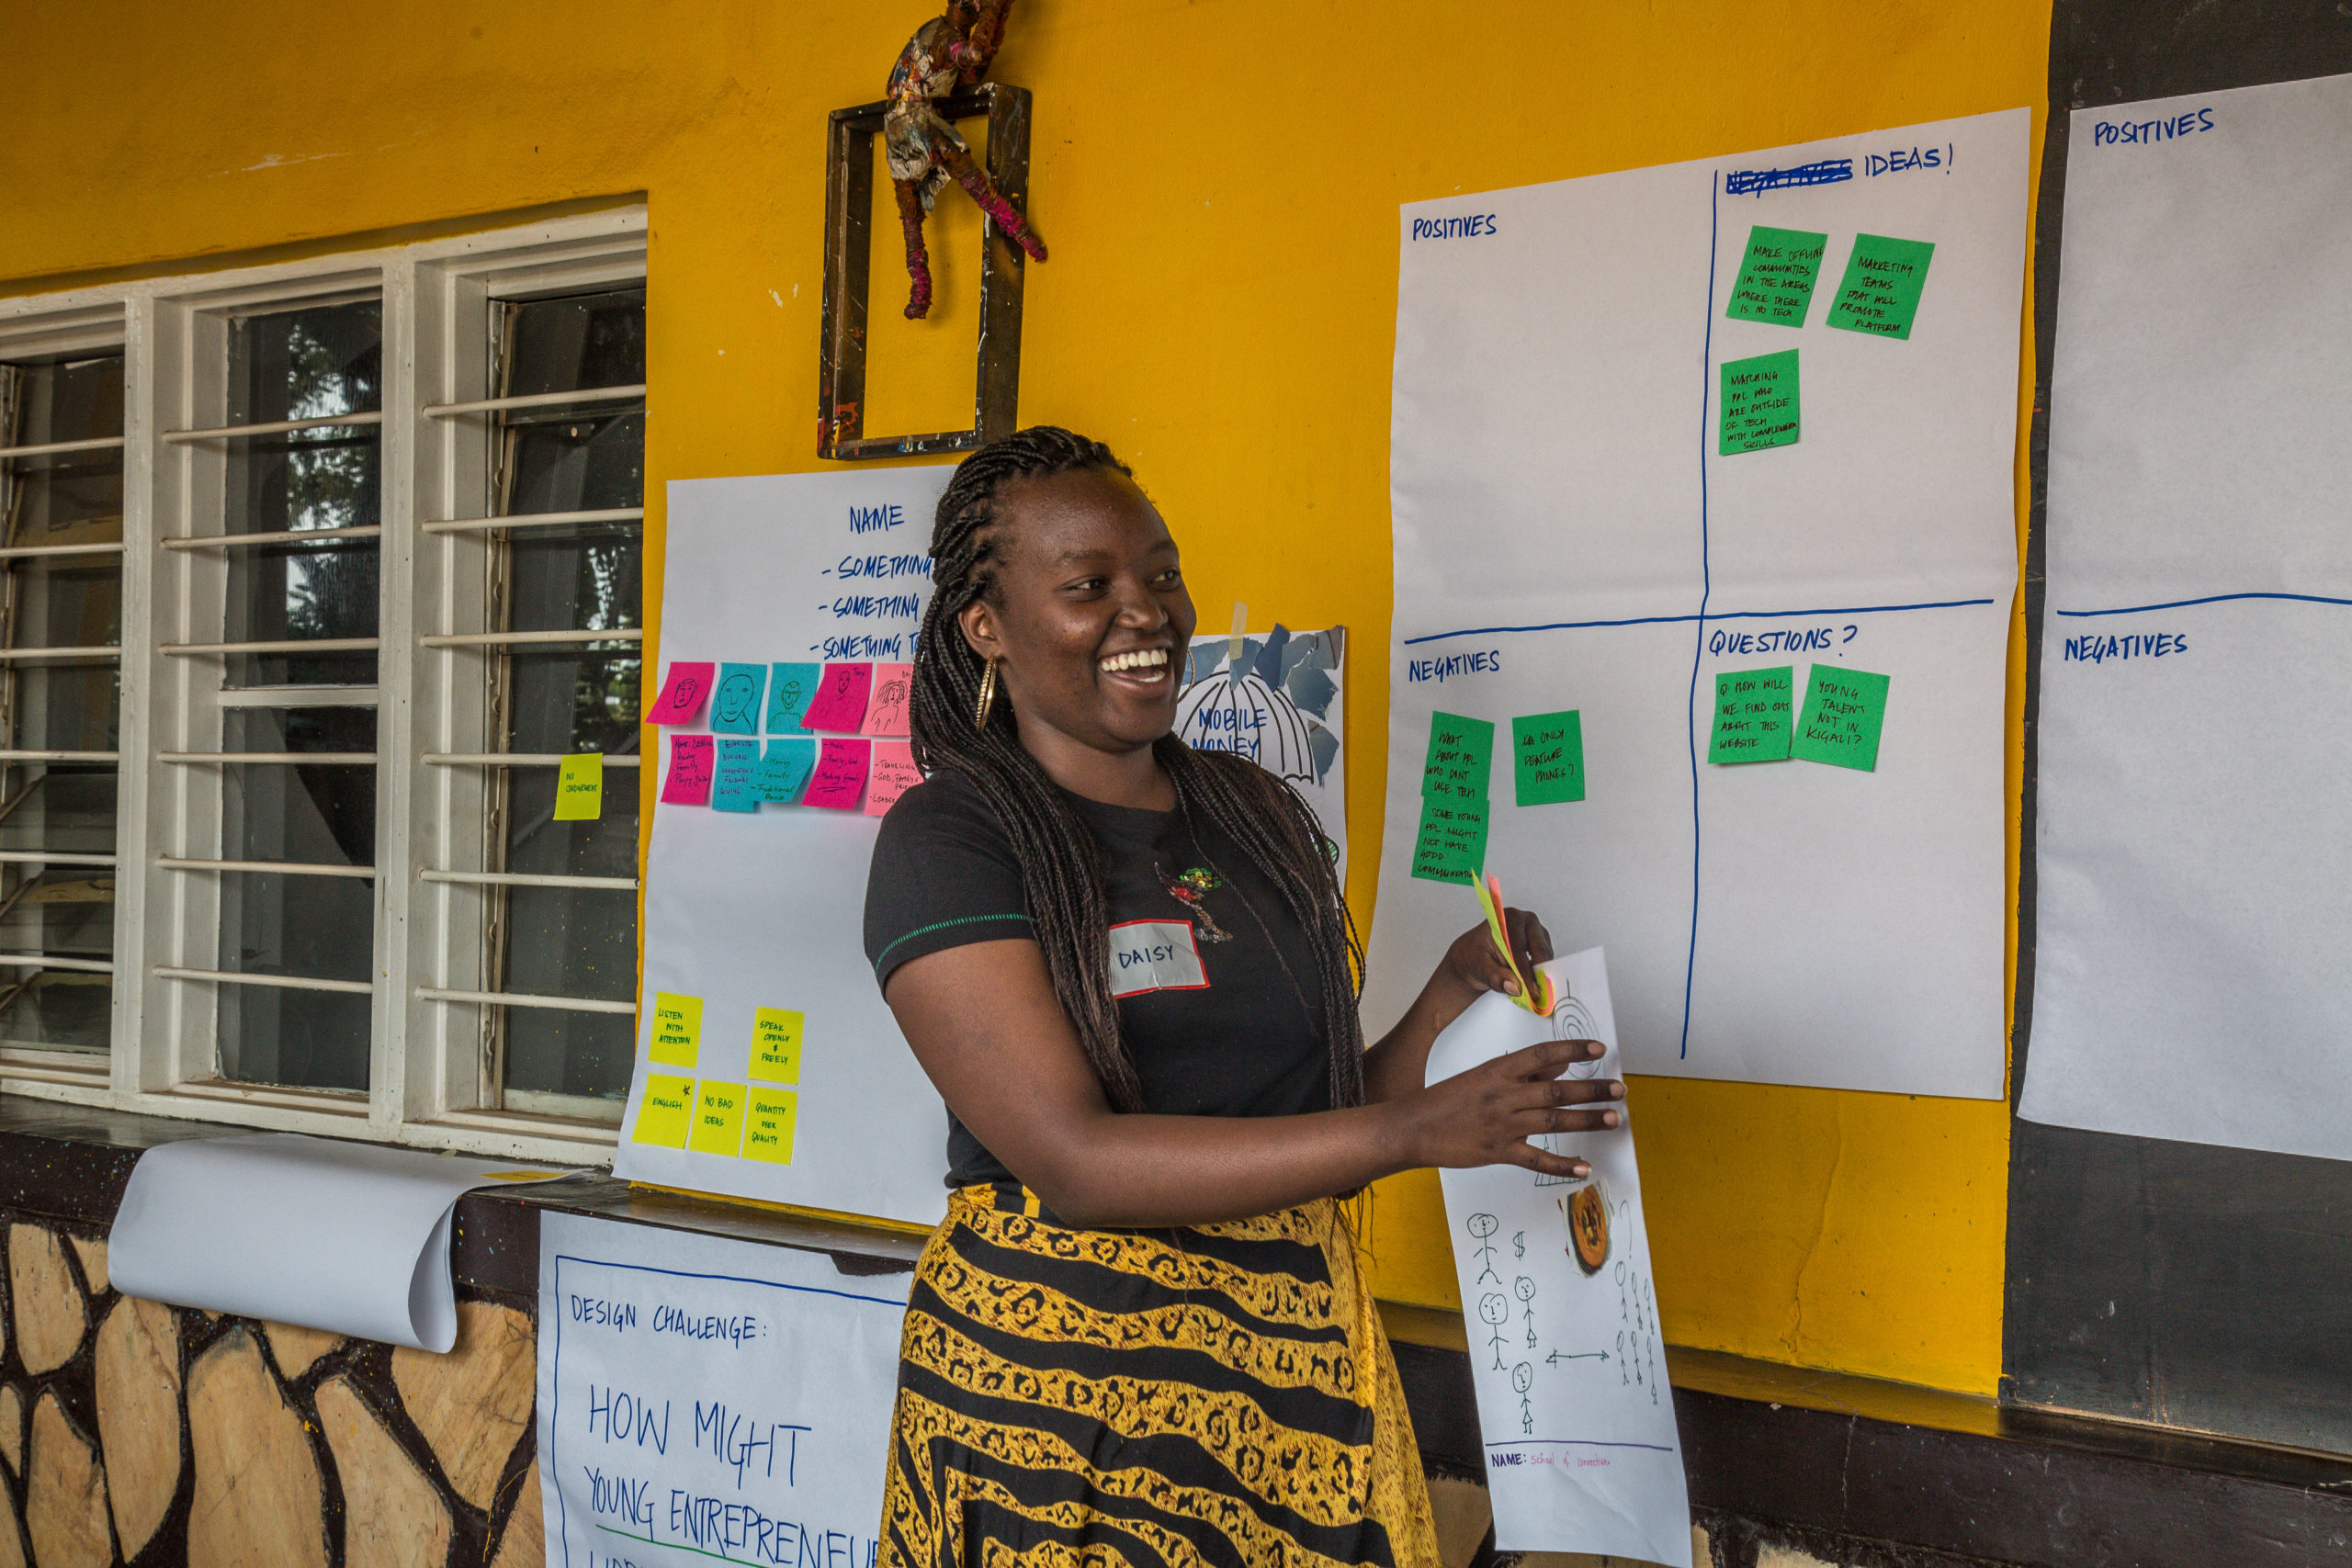 Daisy Isimbi pictured here, a 21-year-old university student studying Business Management in Kigali. Here she's helping run a workshop for Youth Development Labs (YLabs), which conducts a co-design workshop exploring methods to connect young Rwandan entrepreneurs and unemployed youth. 